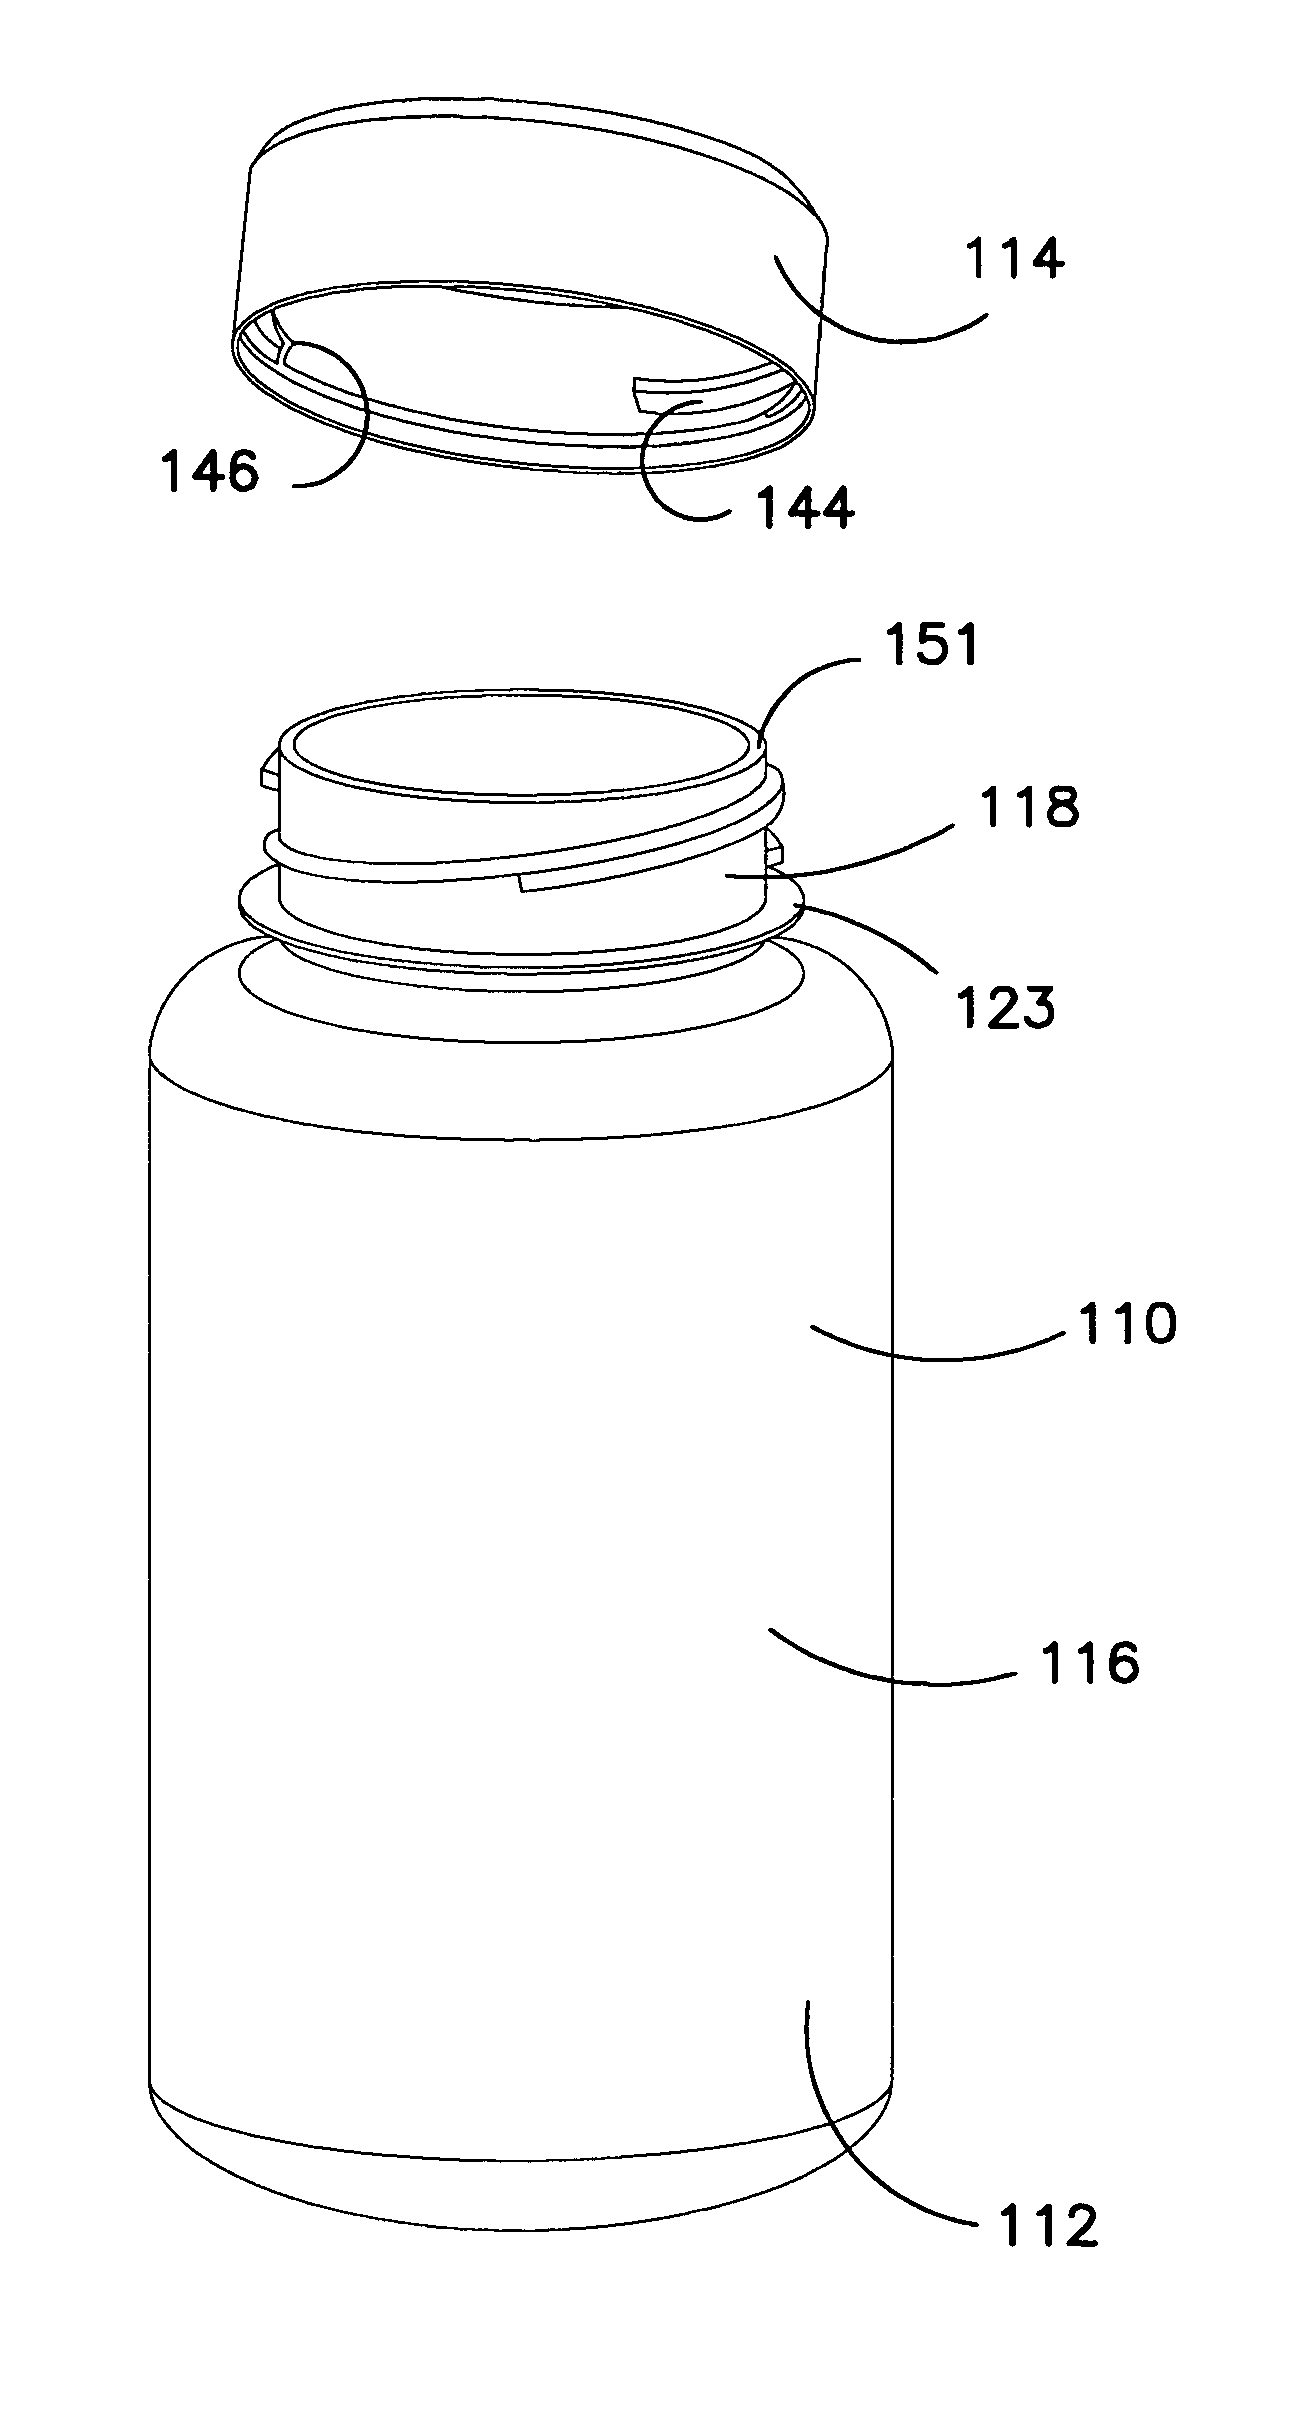 Child resistant container-closure assembly